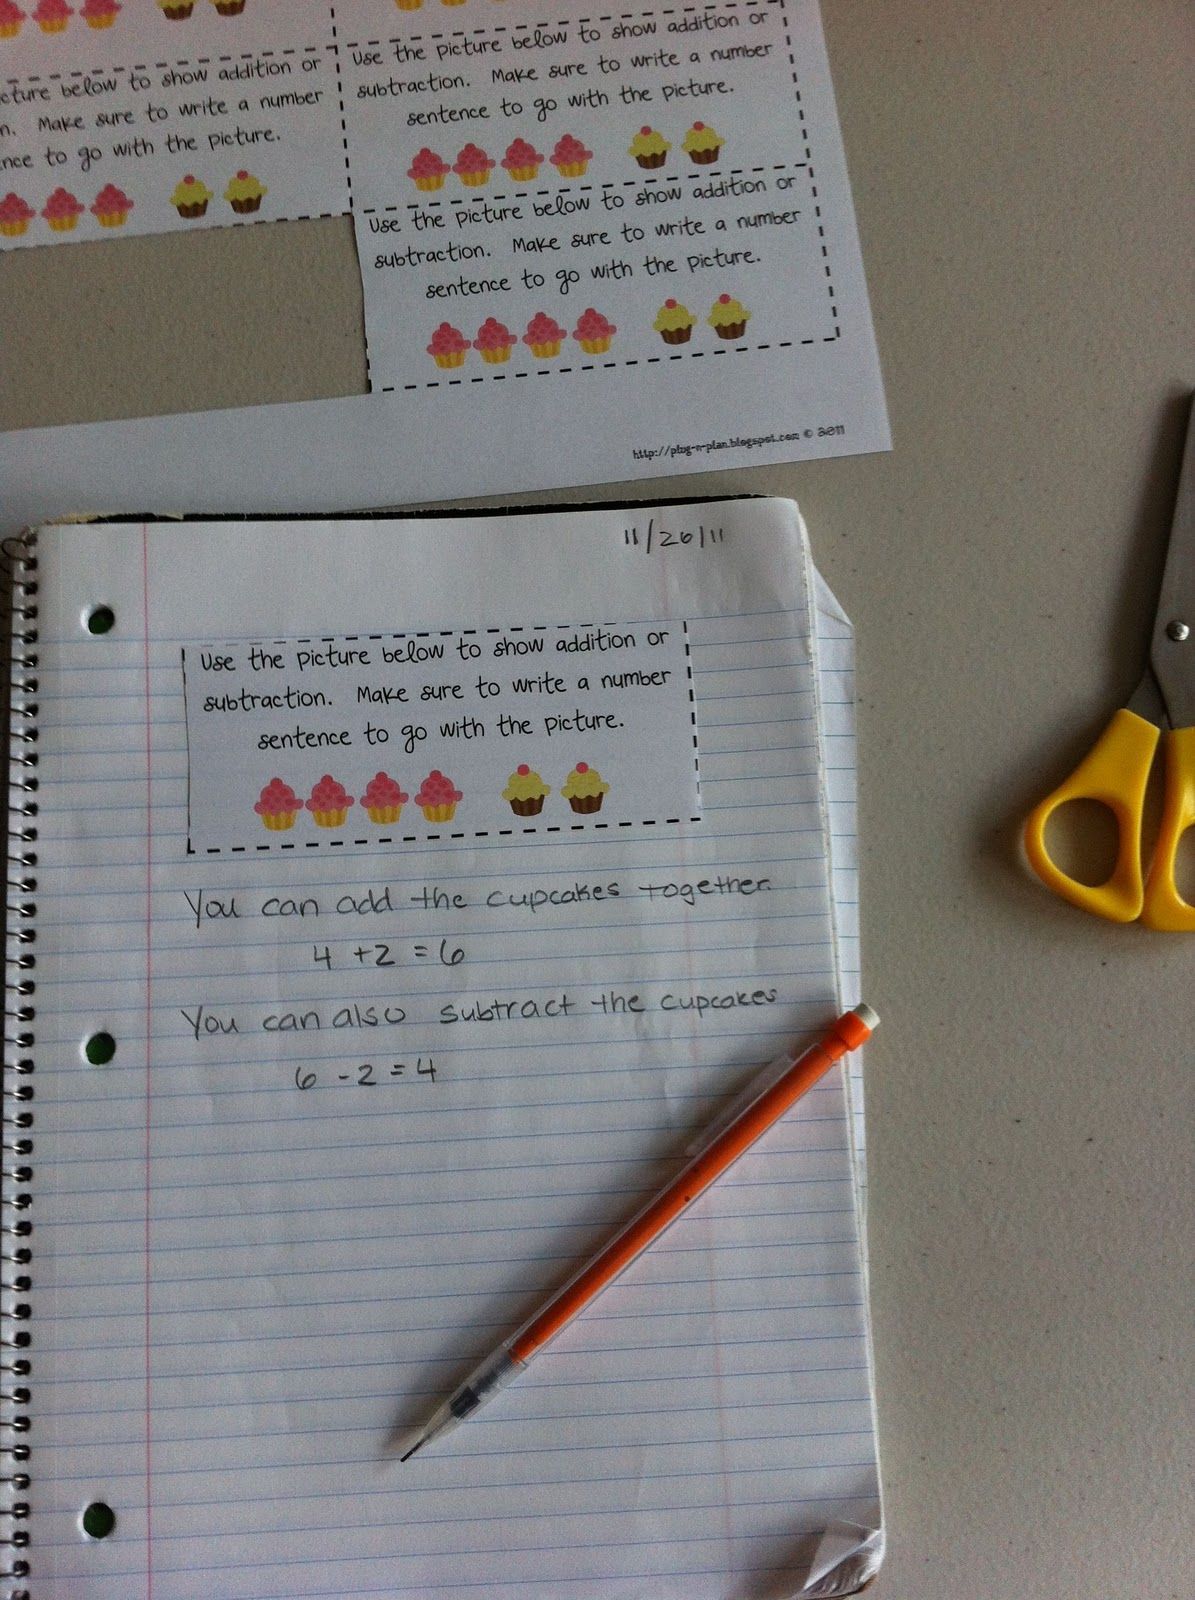 A year of 1st grade math journal prompts – great “glue into journal” idea… Not so much math for me.